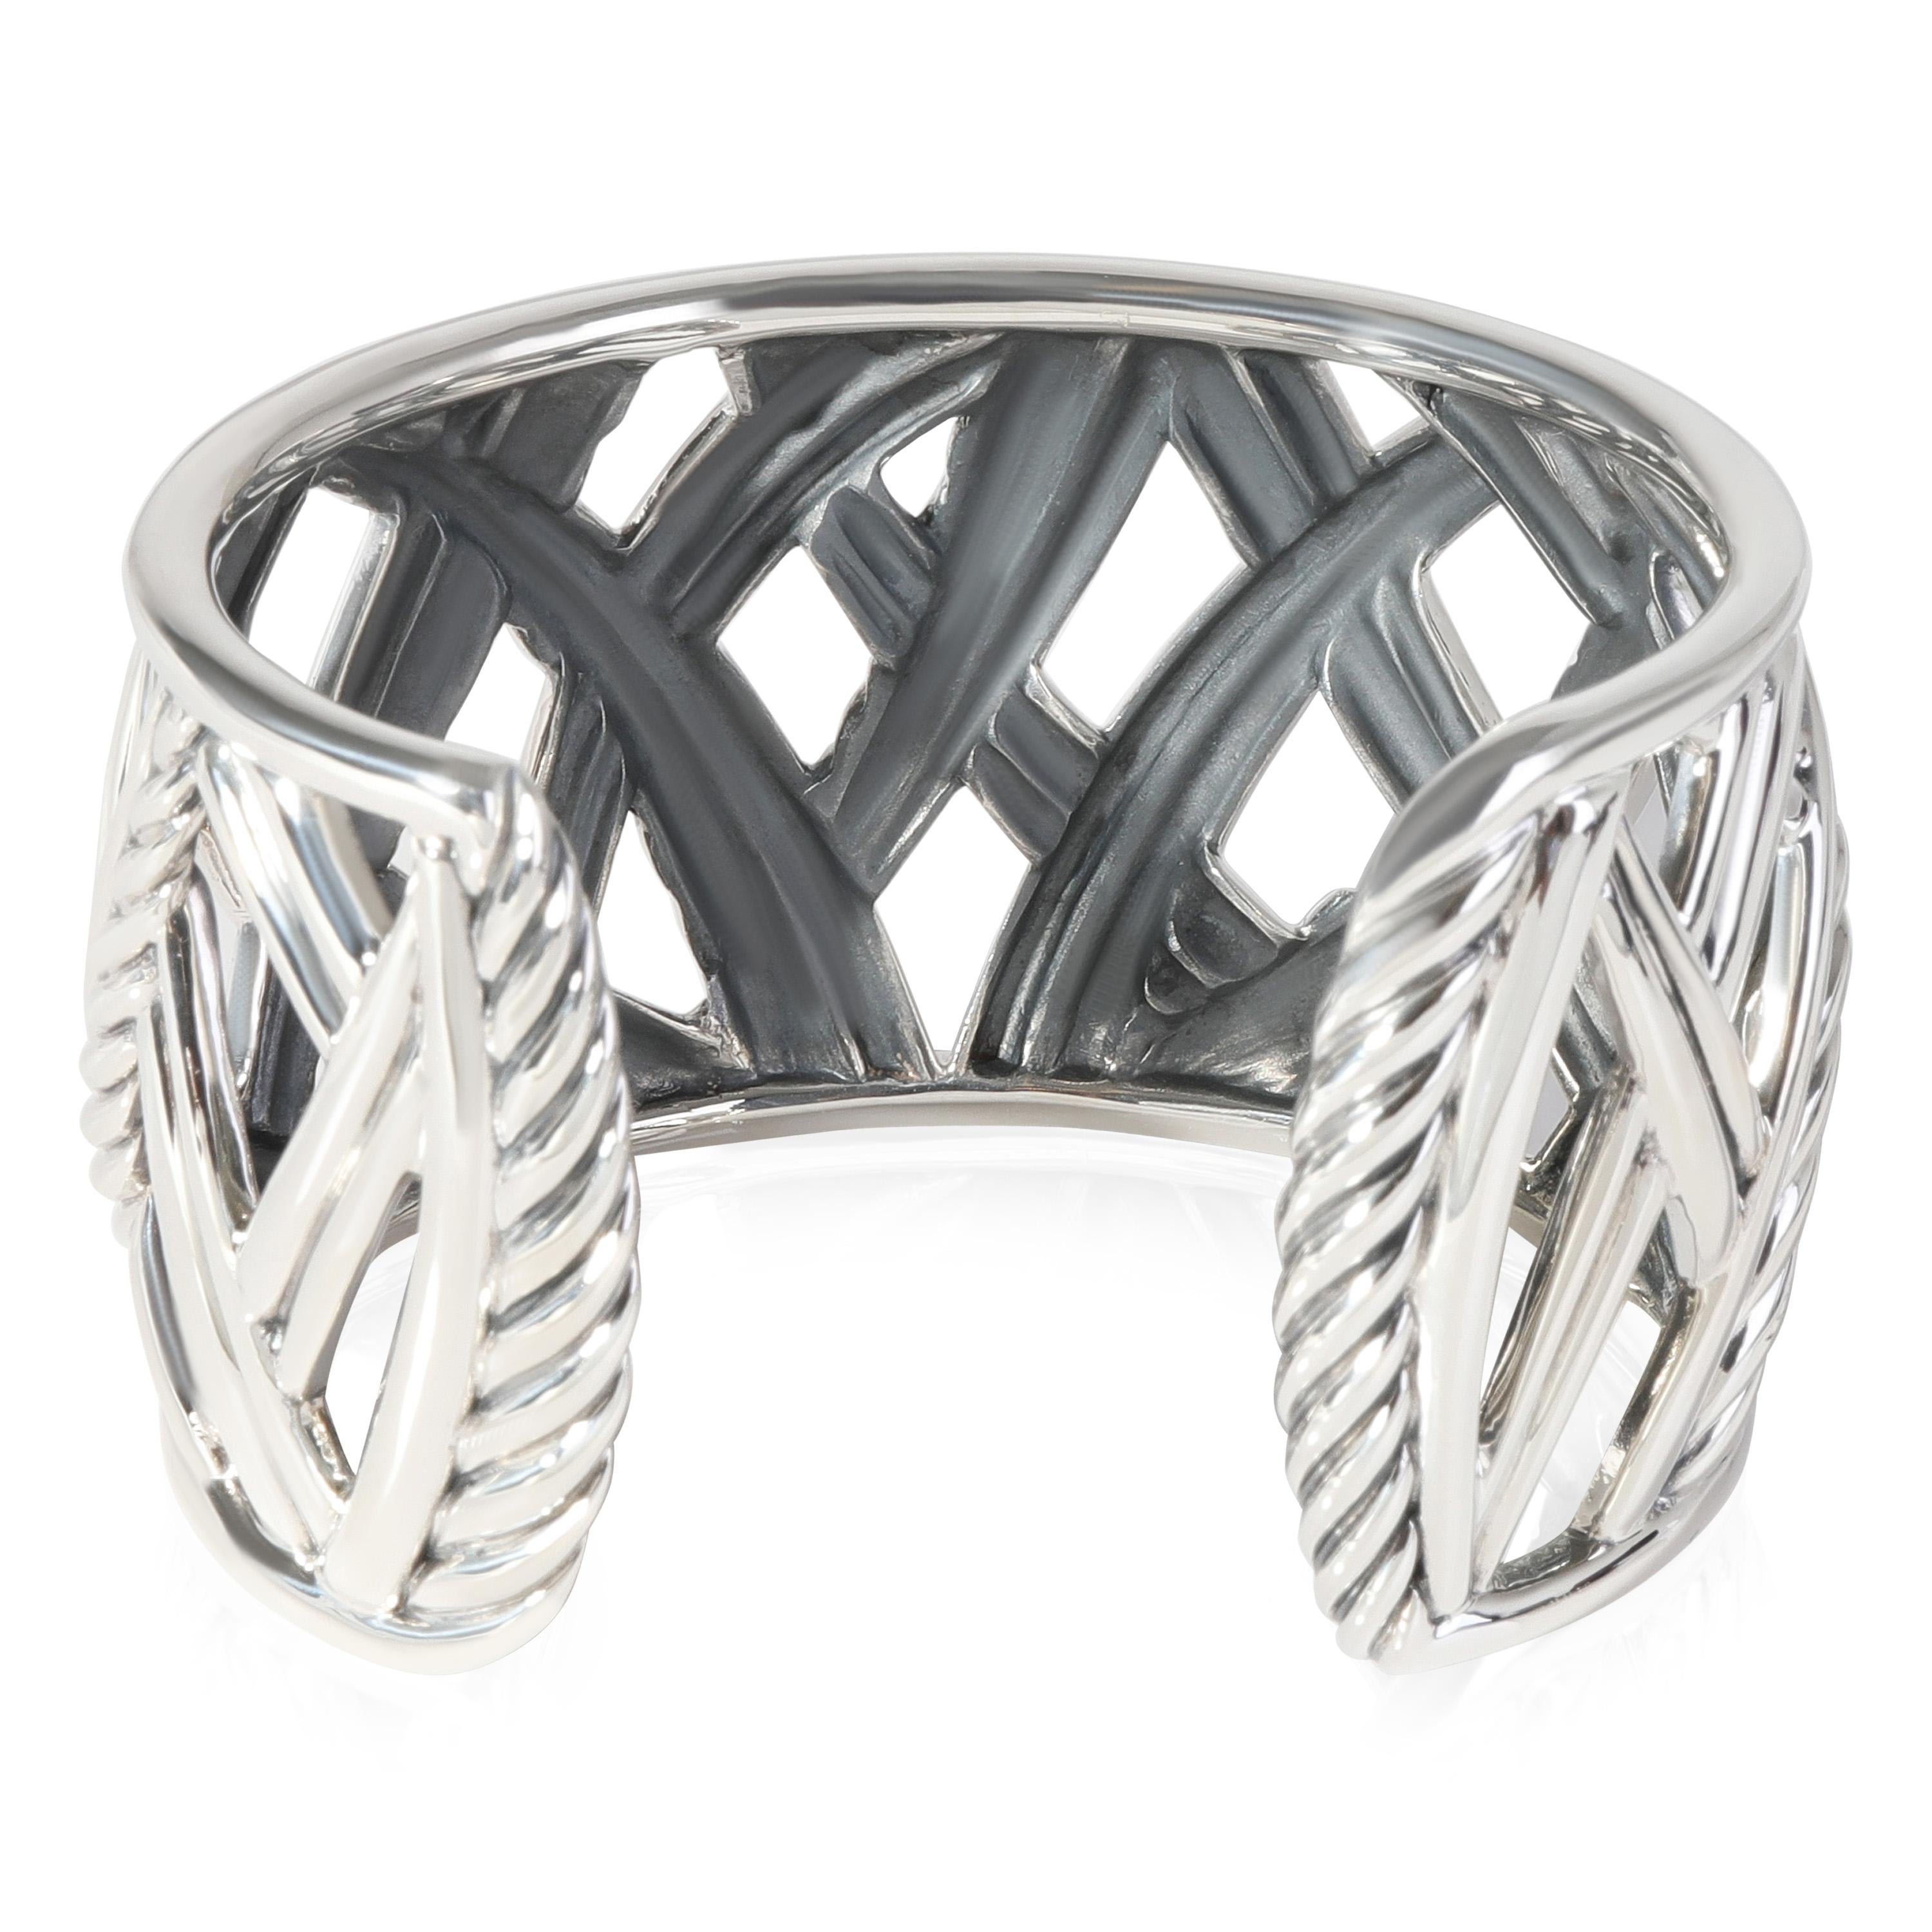 David Yurman Papyrus Diamond Cuff in  Sterling Silver 1.15 CTW

PRIMARY DETAILS
SKU: 118275
Listing Title: David Yurman Papyrus Diamond Cuff in  Sterling Silver 1.15 CTW
Condition Description: Retails for 3250 USD. In excellent condition and